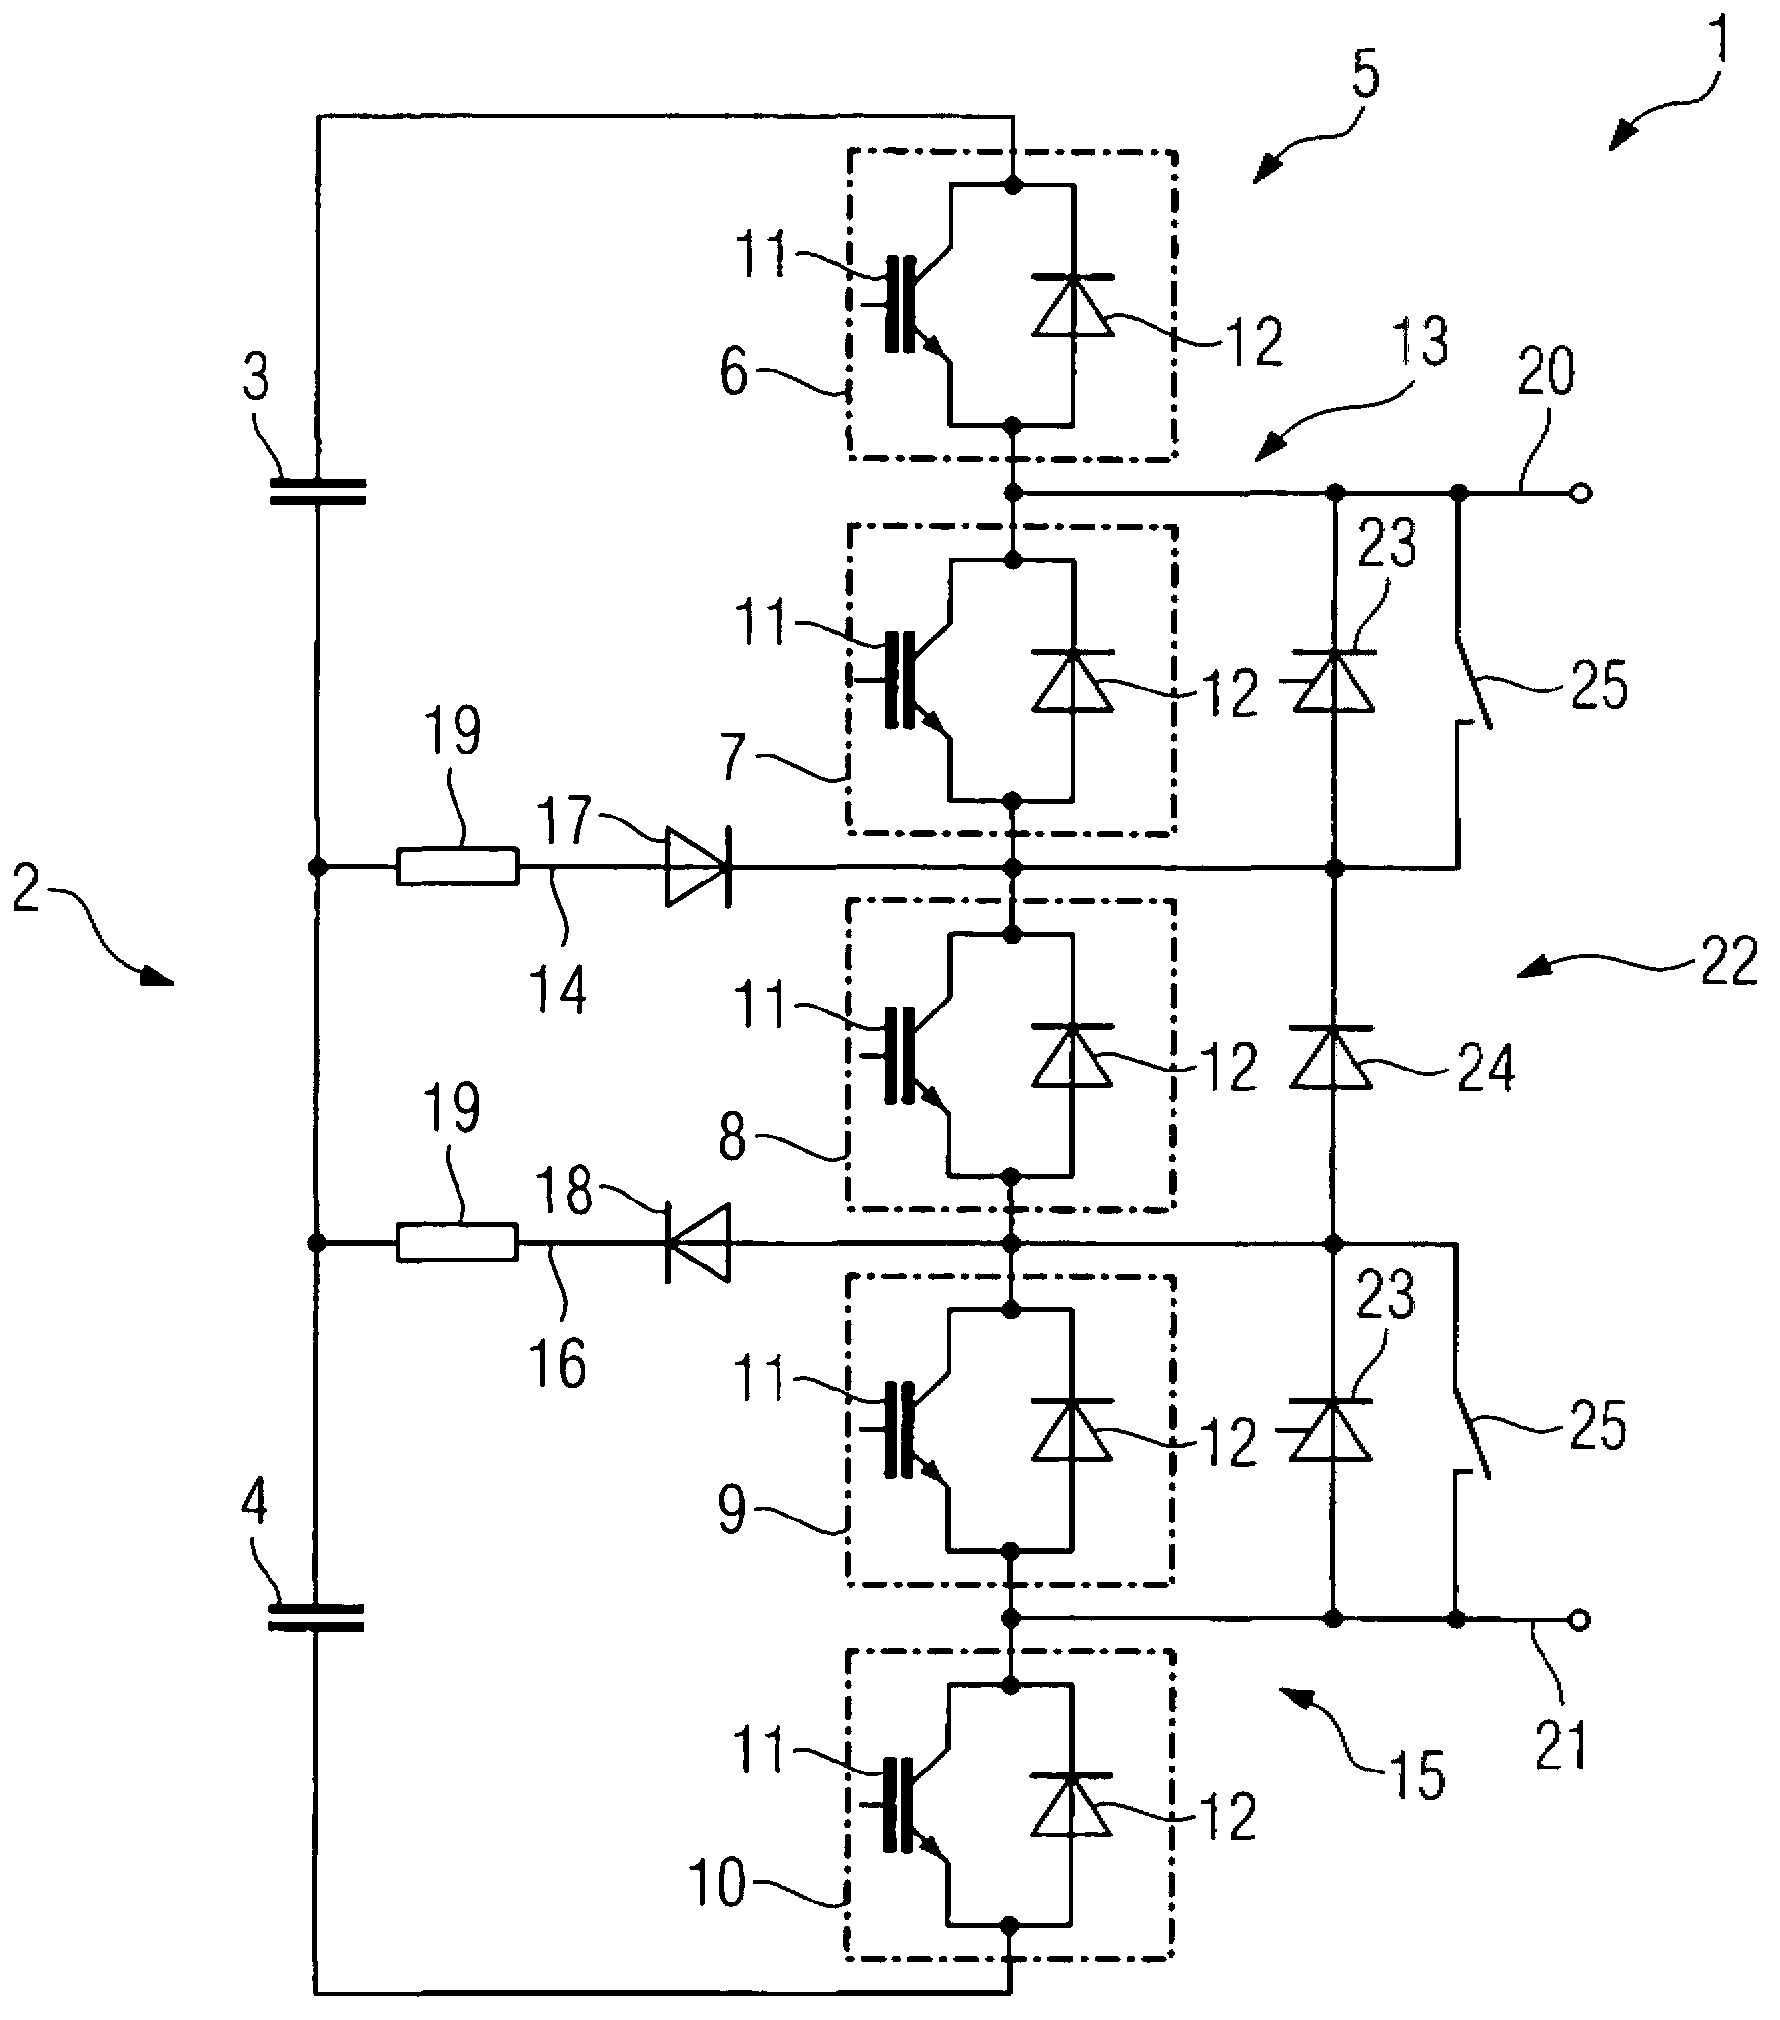 Double module for modular multi-stage converter